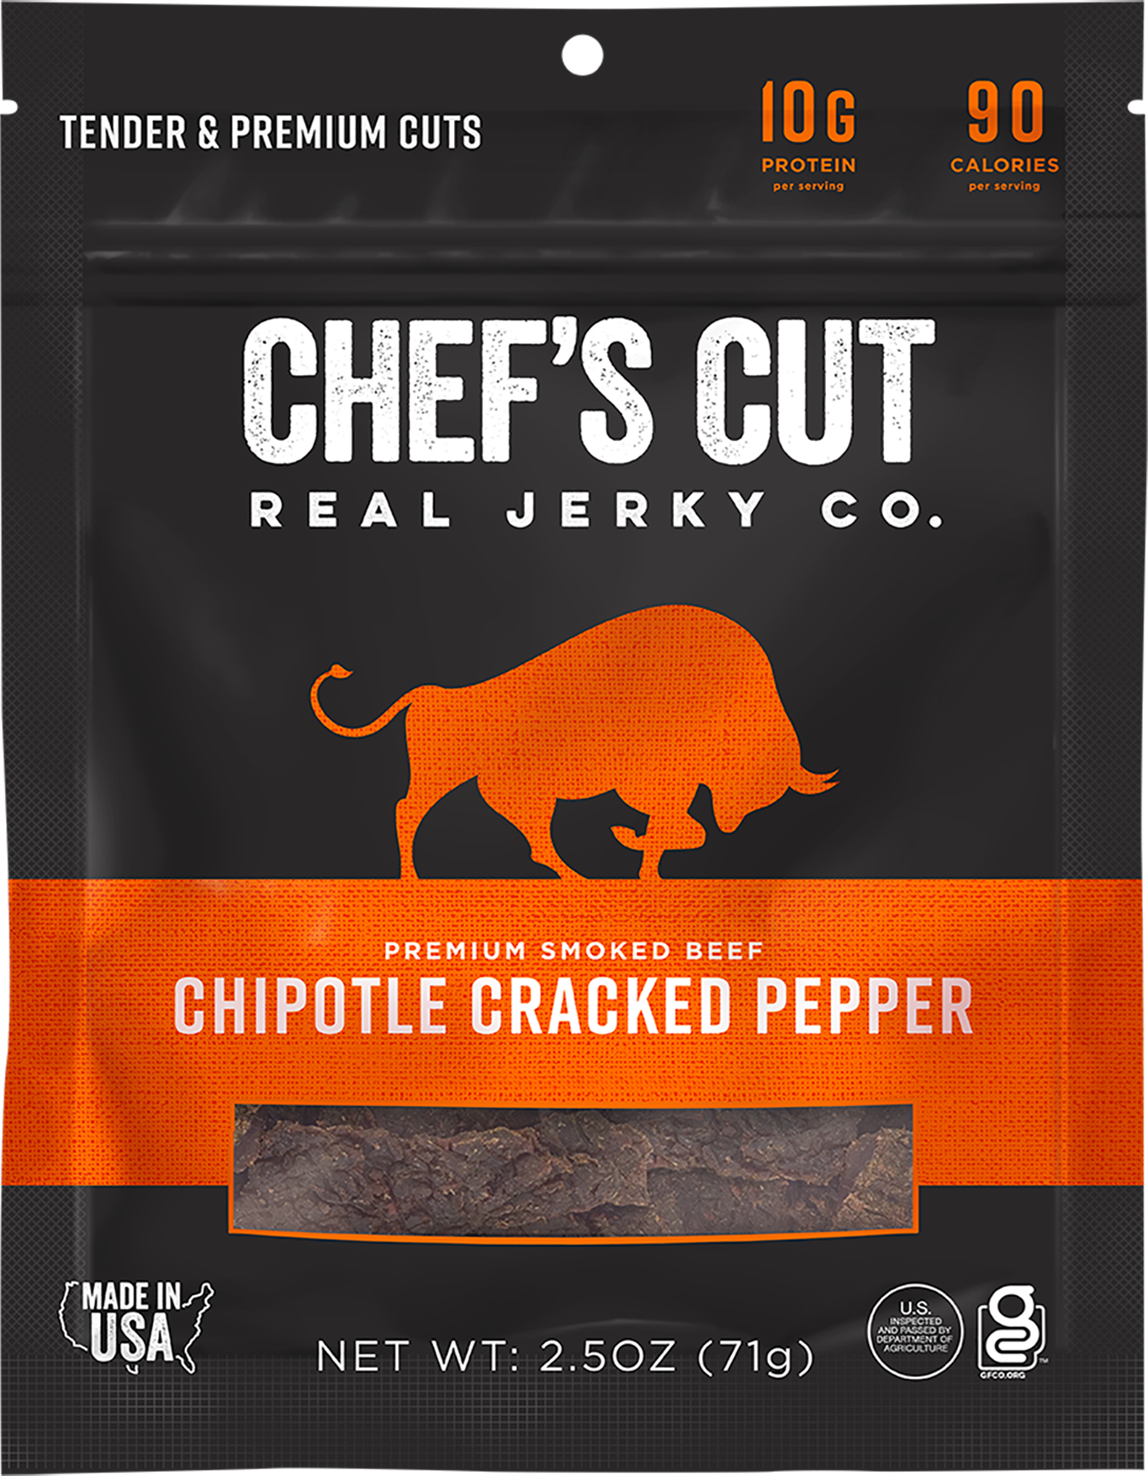 Chipotle Cracked Pepper